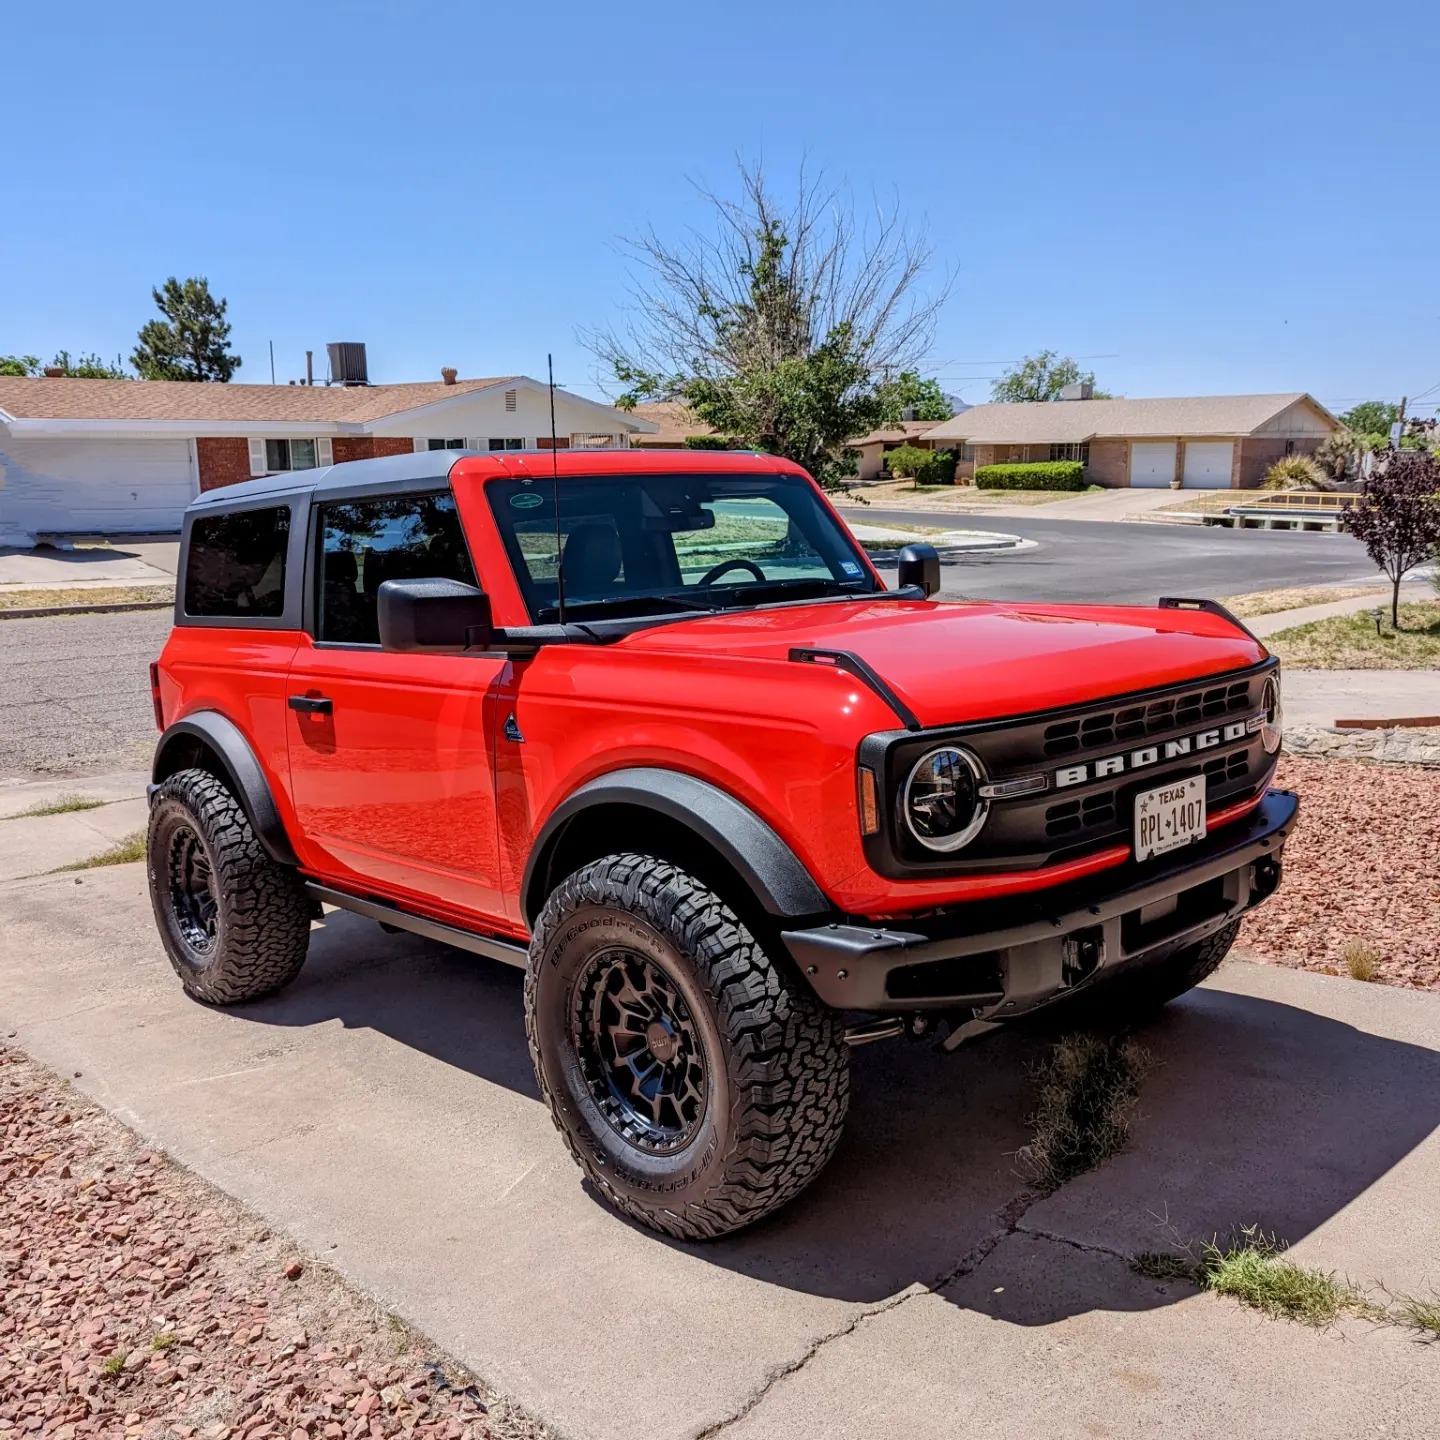 Ford Bronco RACE RED Bronco Club Modified Race Red Bronco Build KMC 718 Summit wheels 17x8.5 0 offset 